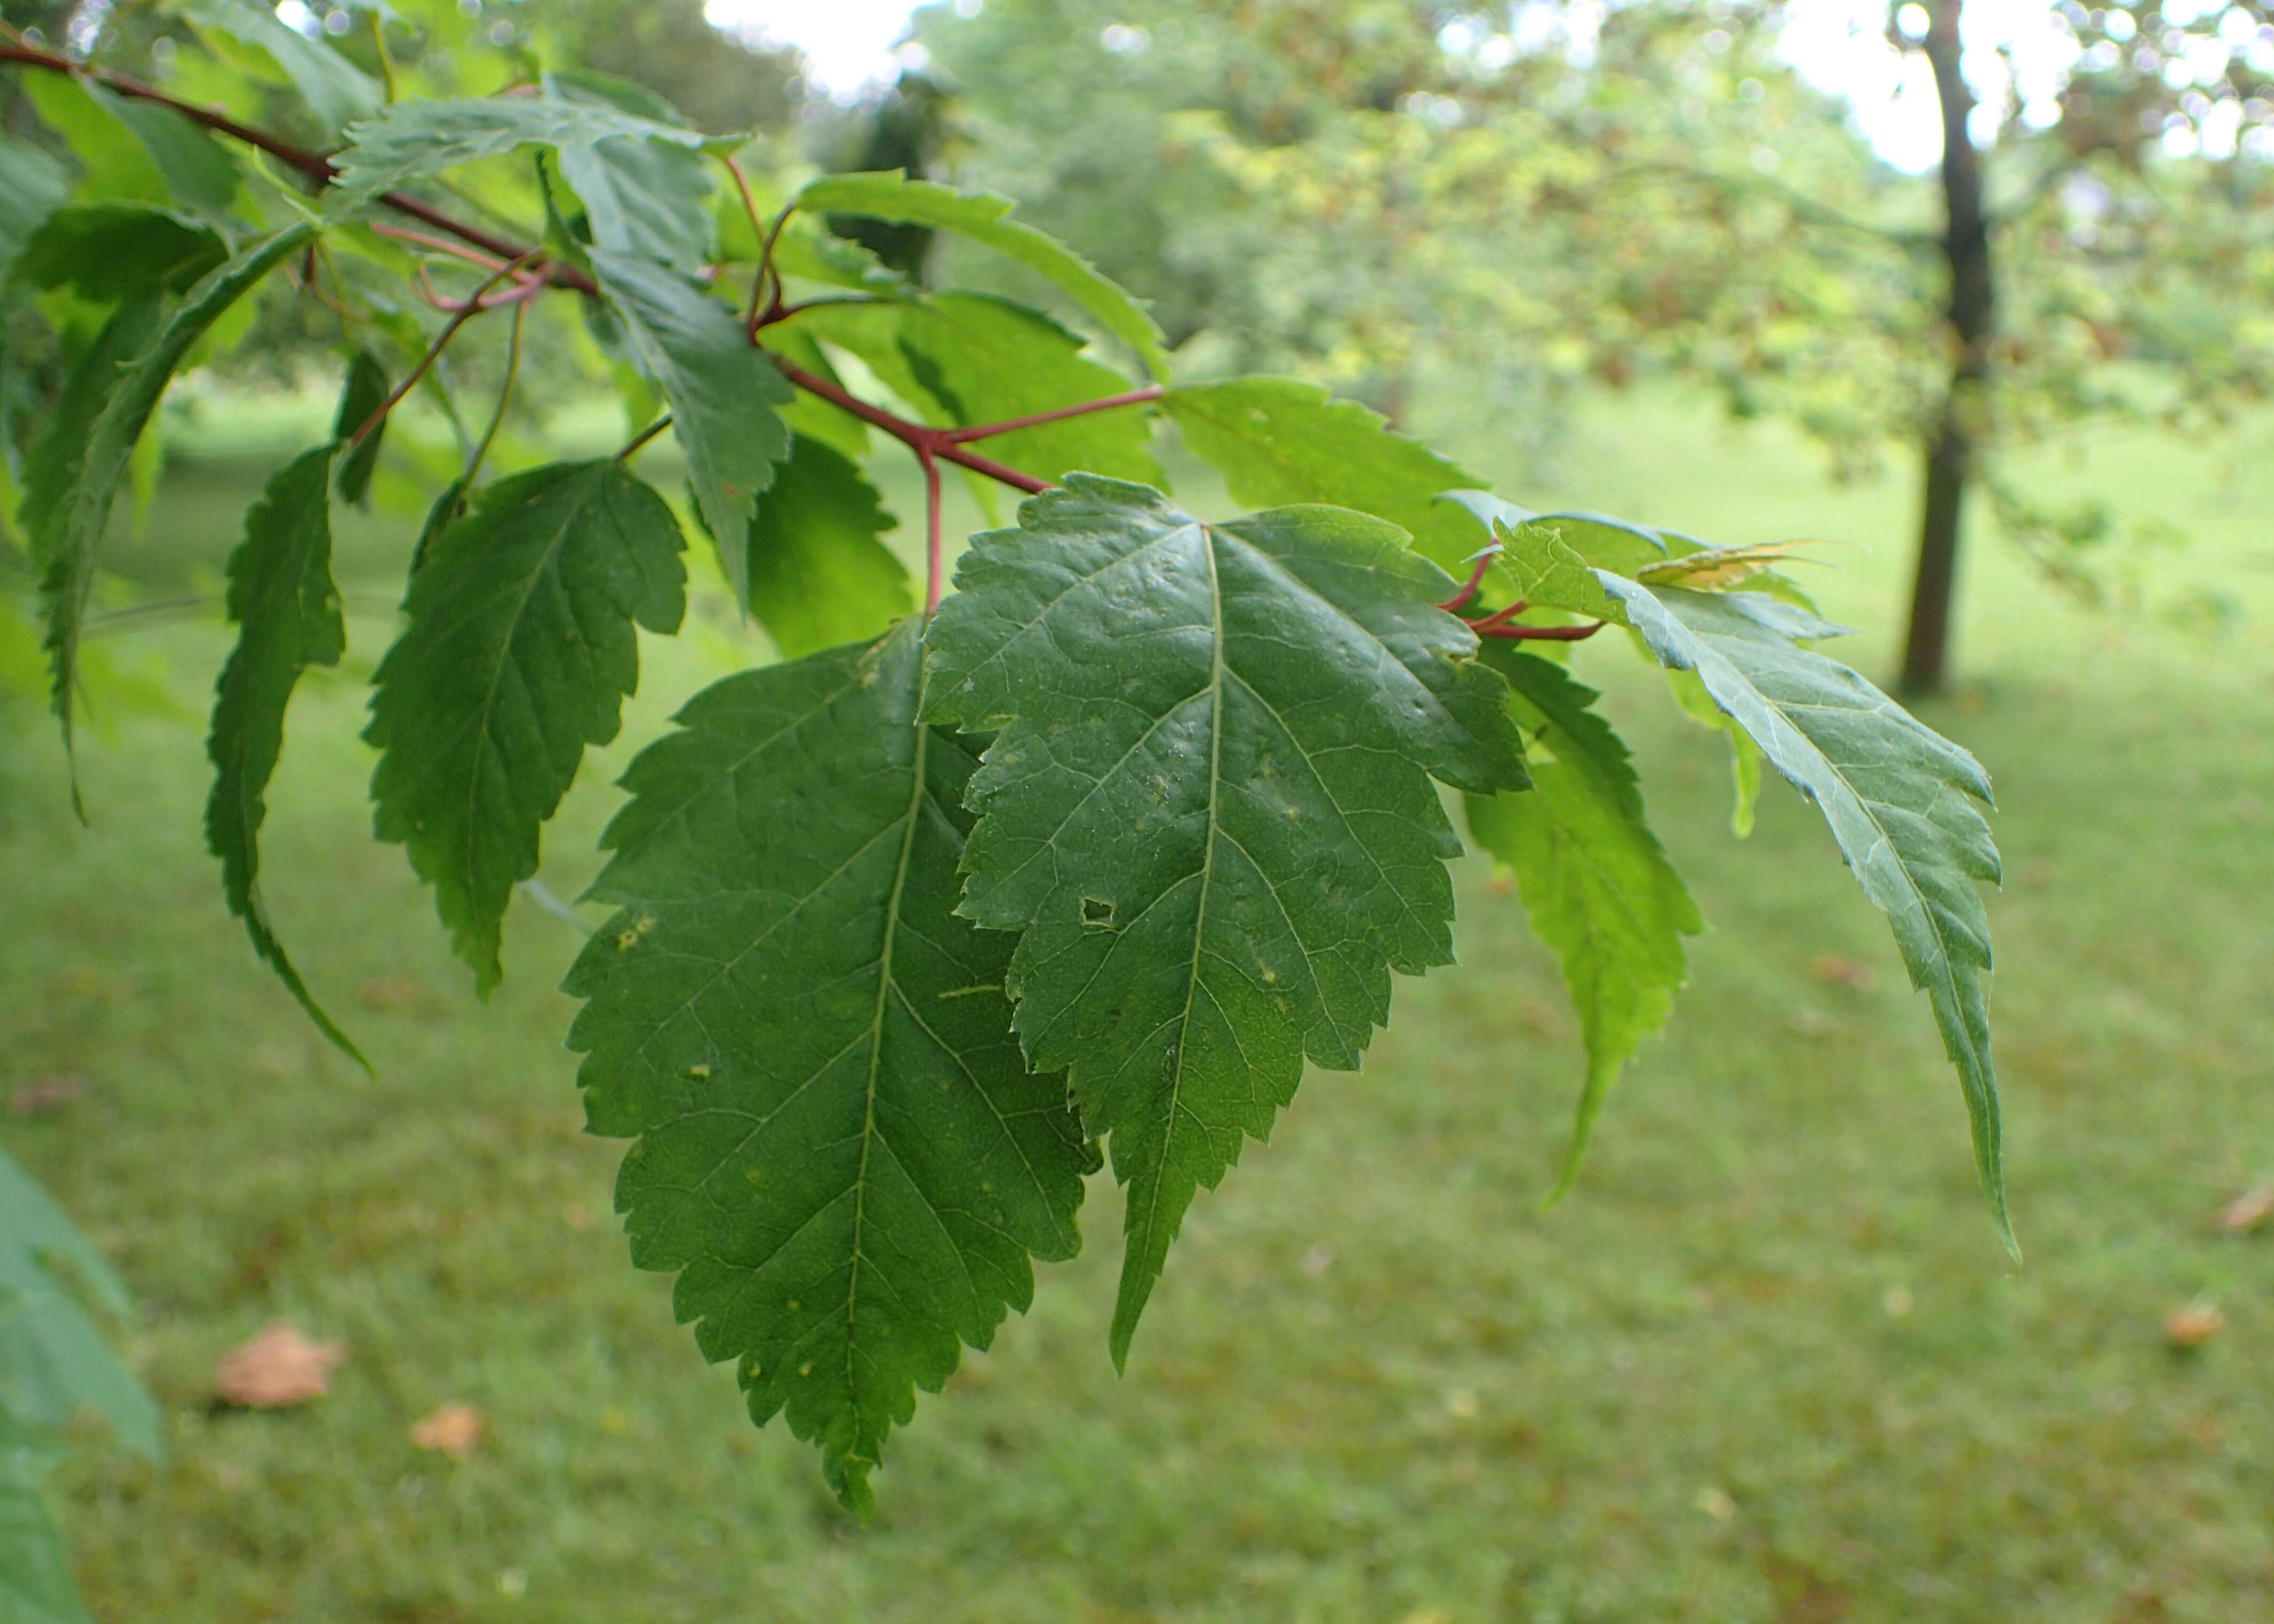 Image of Birch-leafed Maple